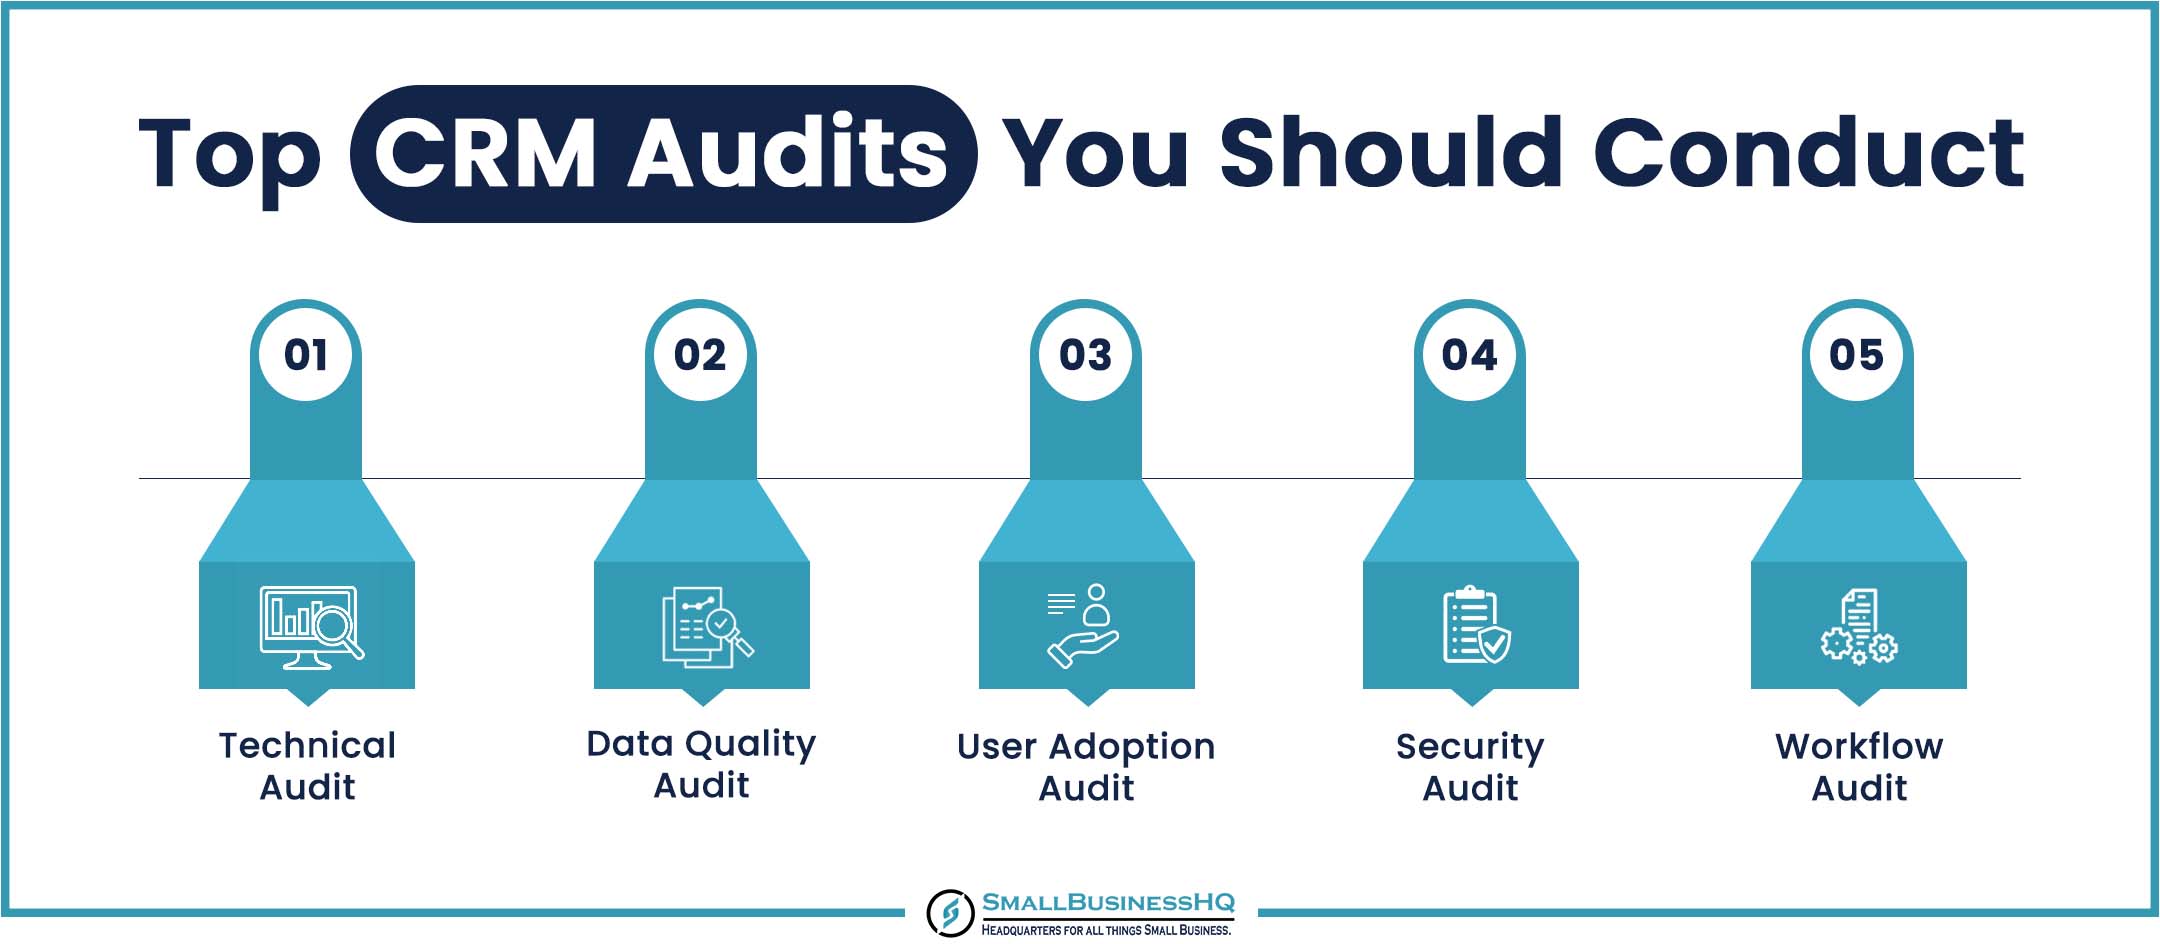 Top CRM Audits You Should Conduct